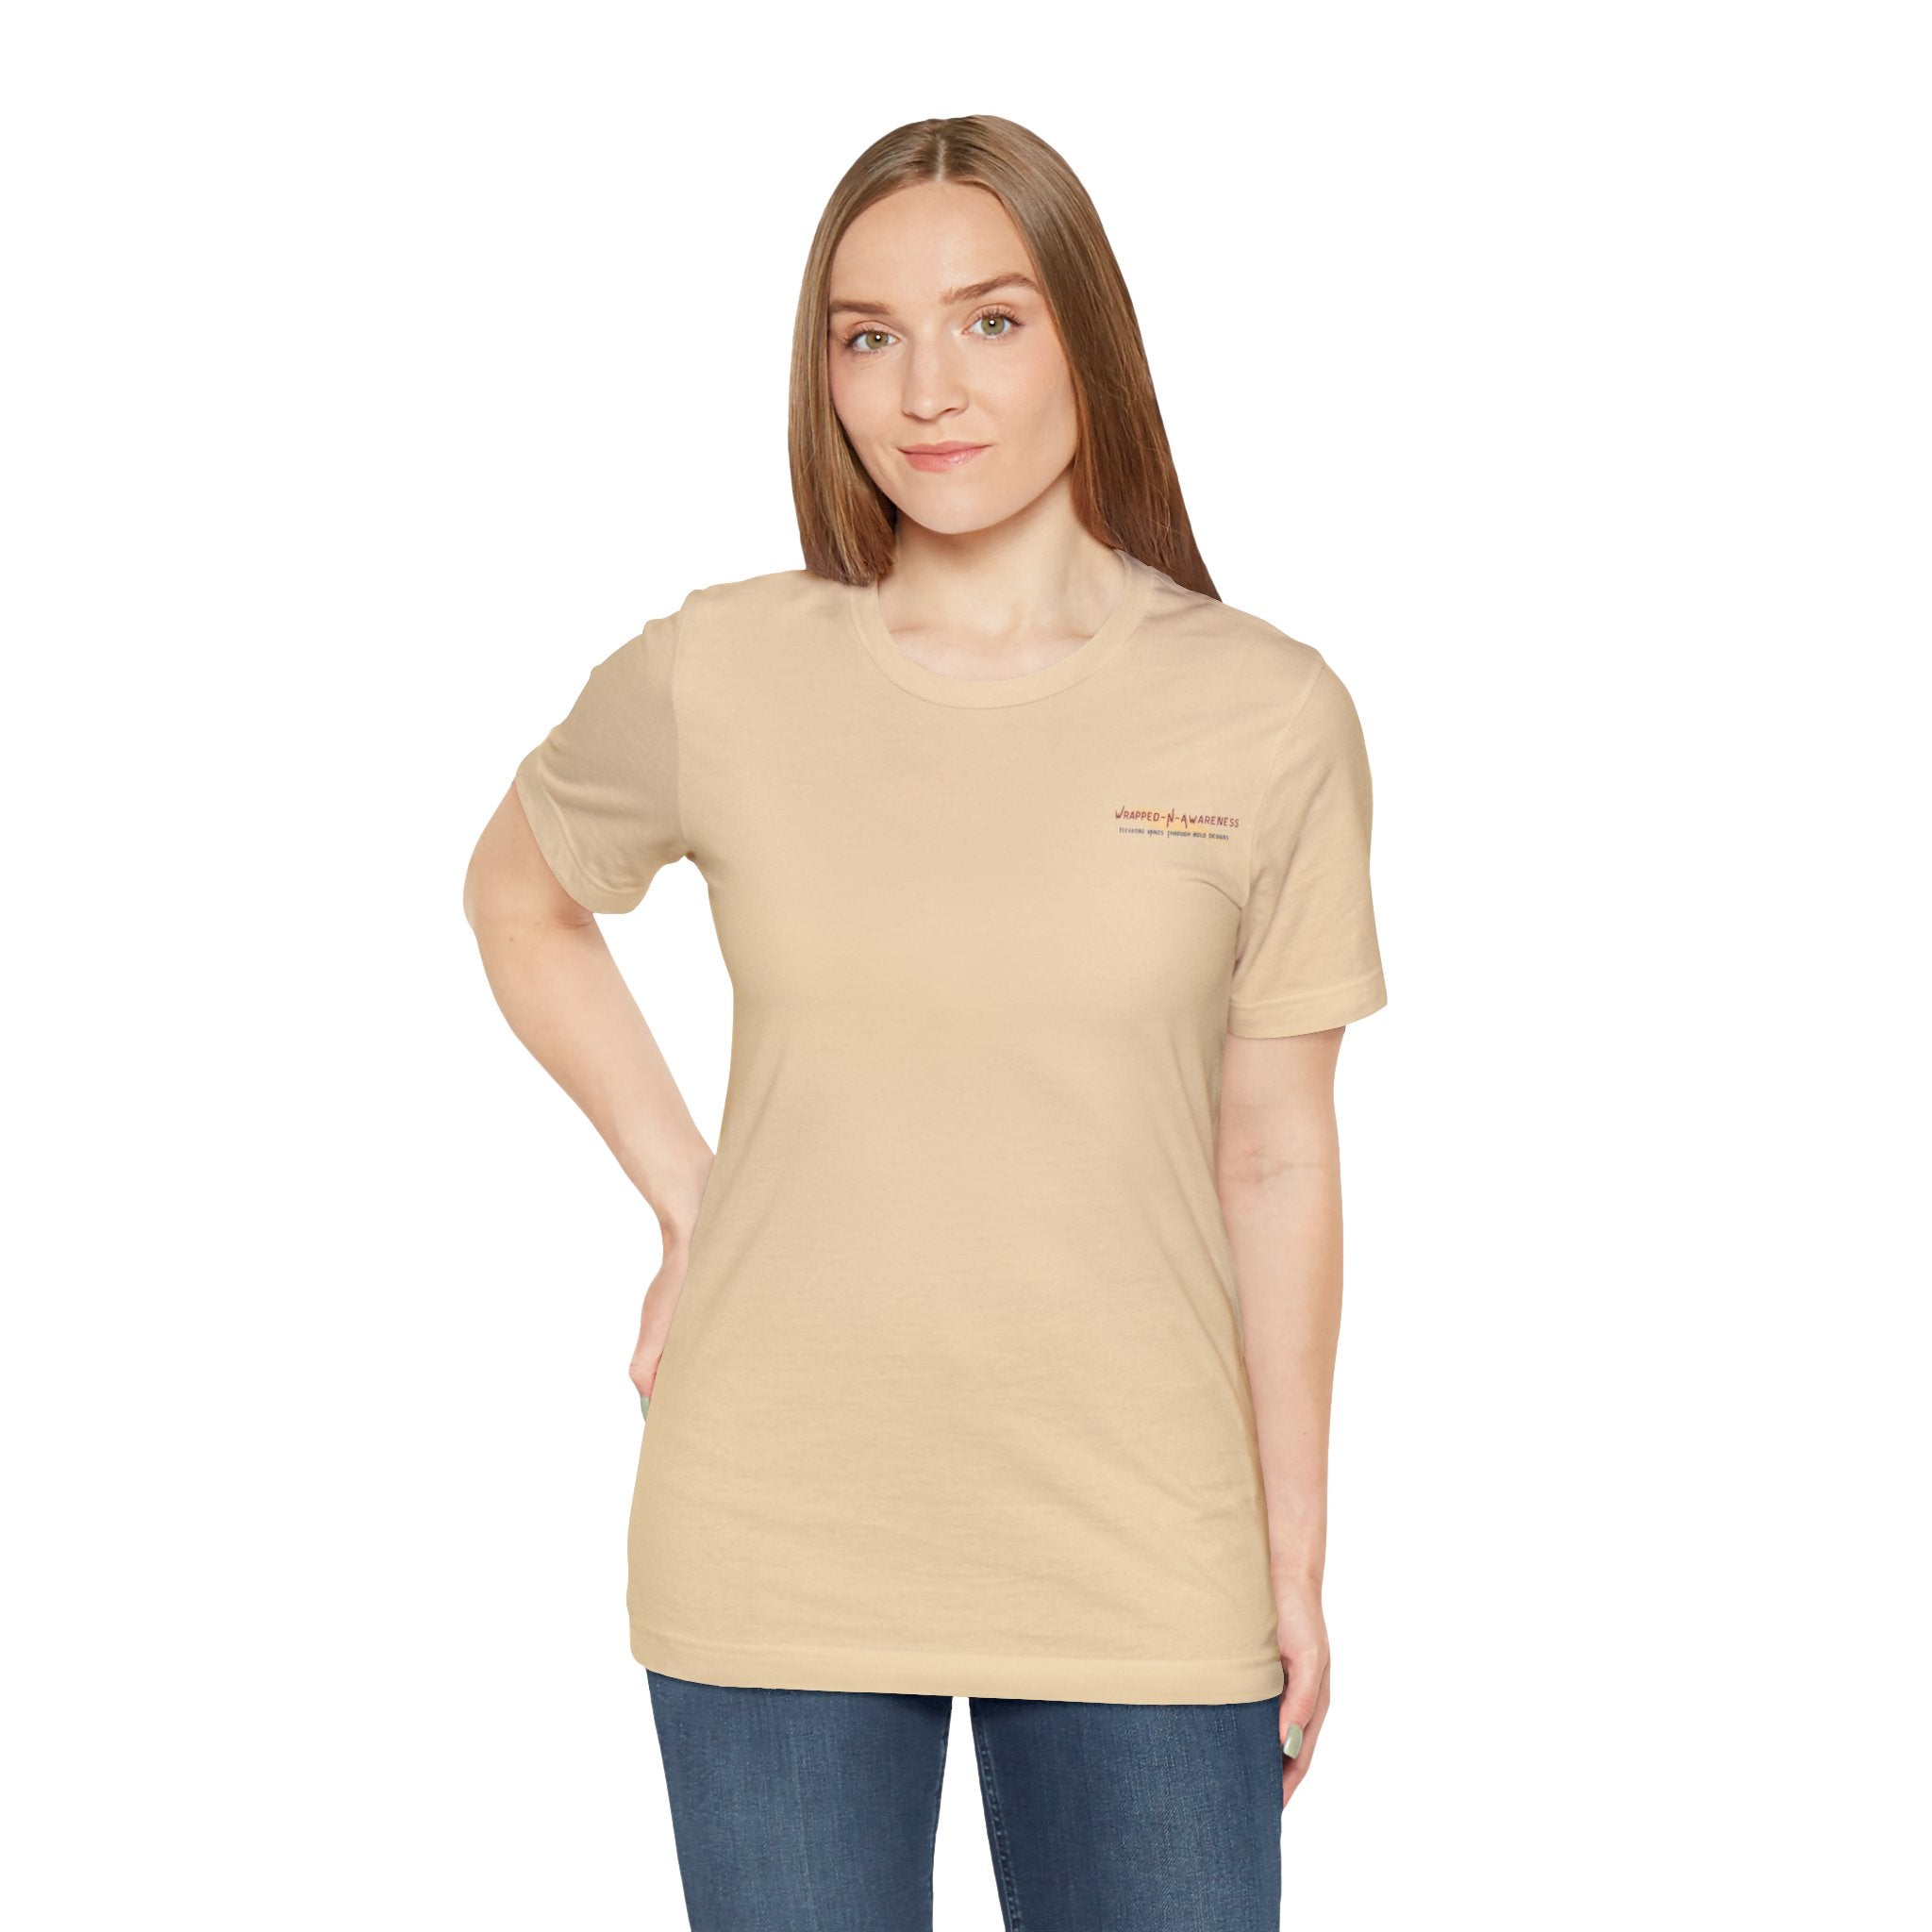 Inspire Growth Jersey Tee - Bella+Canvas 3001 Turquoise Airlume Cotton Bella+Canvas 3001 Crew Neckline Jersey Short Sleeve Lightweight Fabric Mental Health Support Retail Fit Tear-away Label Tee Unisex Tee T-Shirt 15754027402281051183_2048 Printify